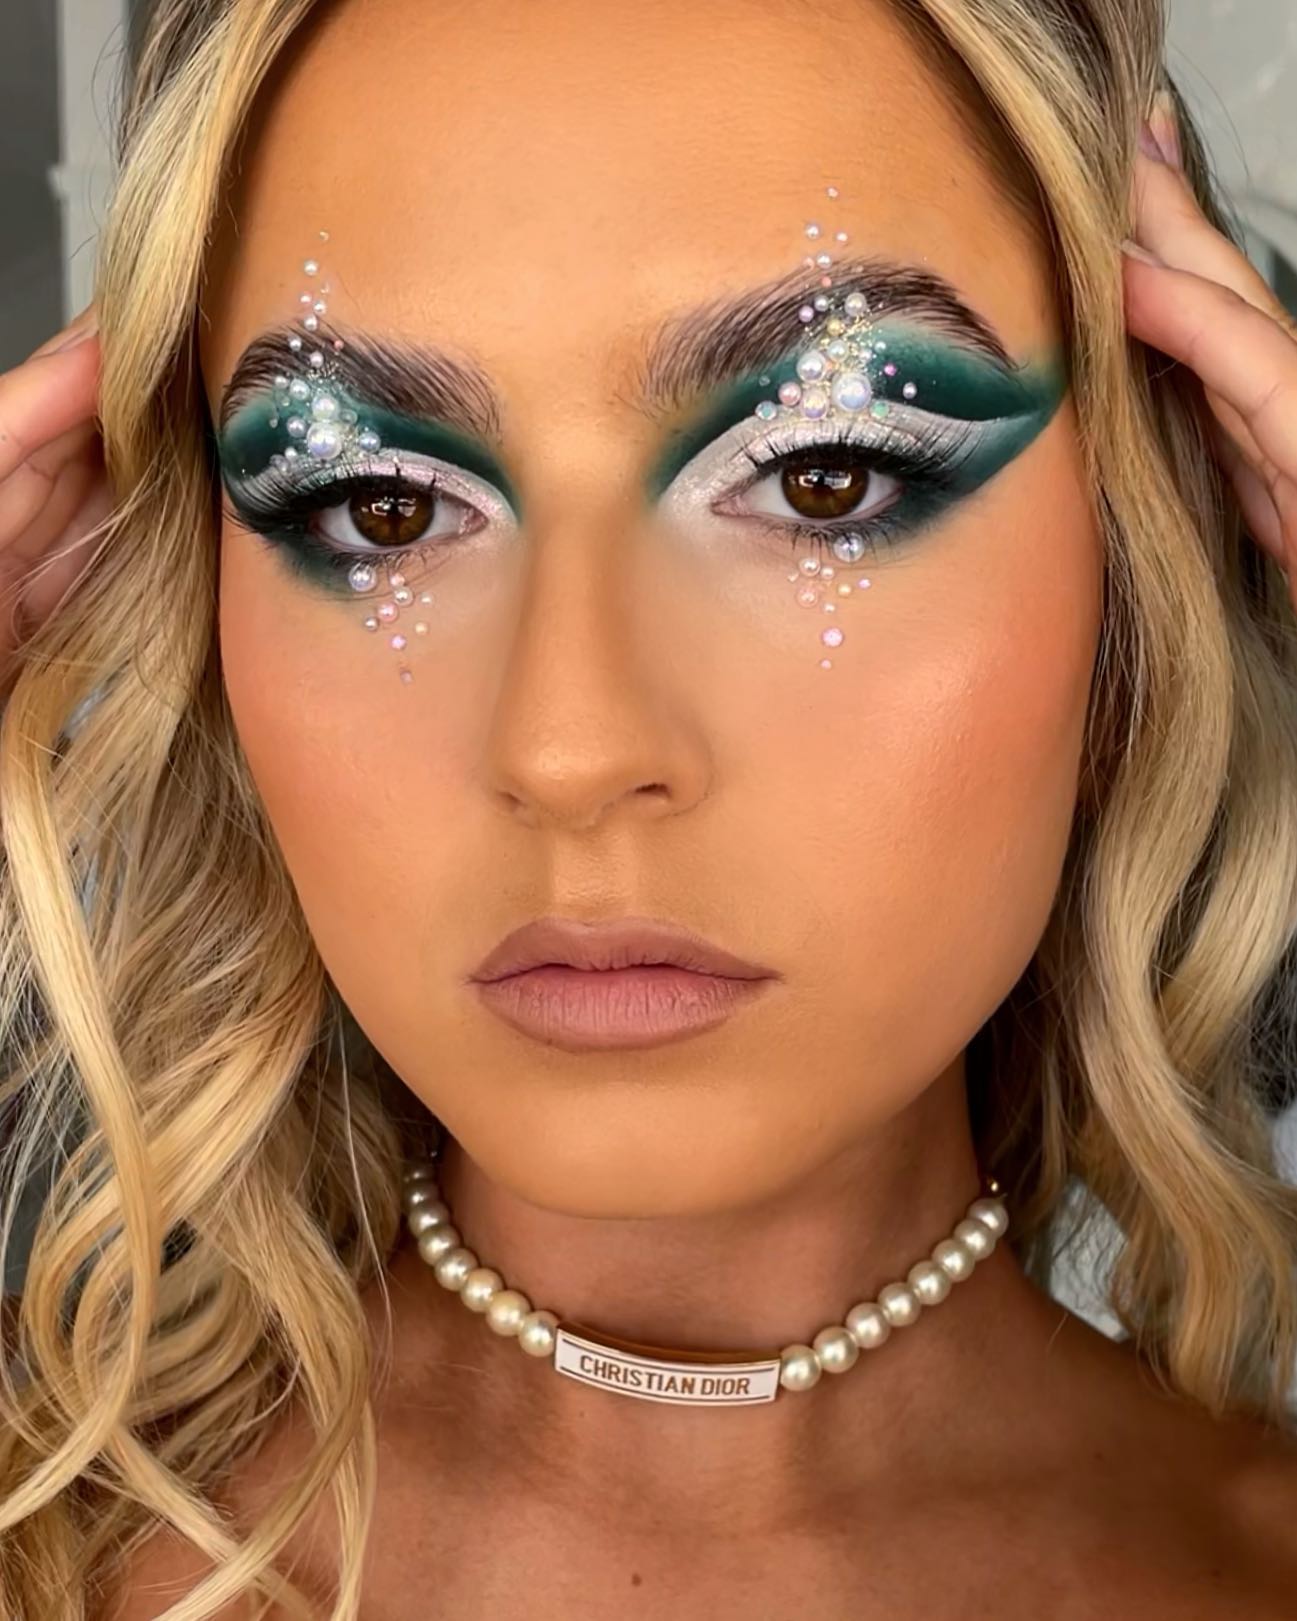 Green and White Eyeshadows with Rhinestone Makeup Look